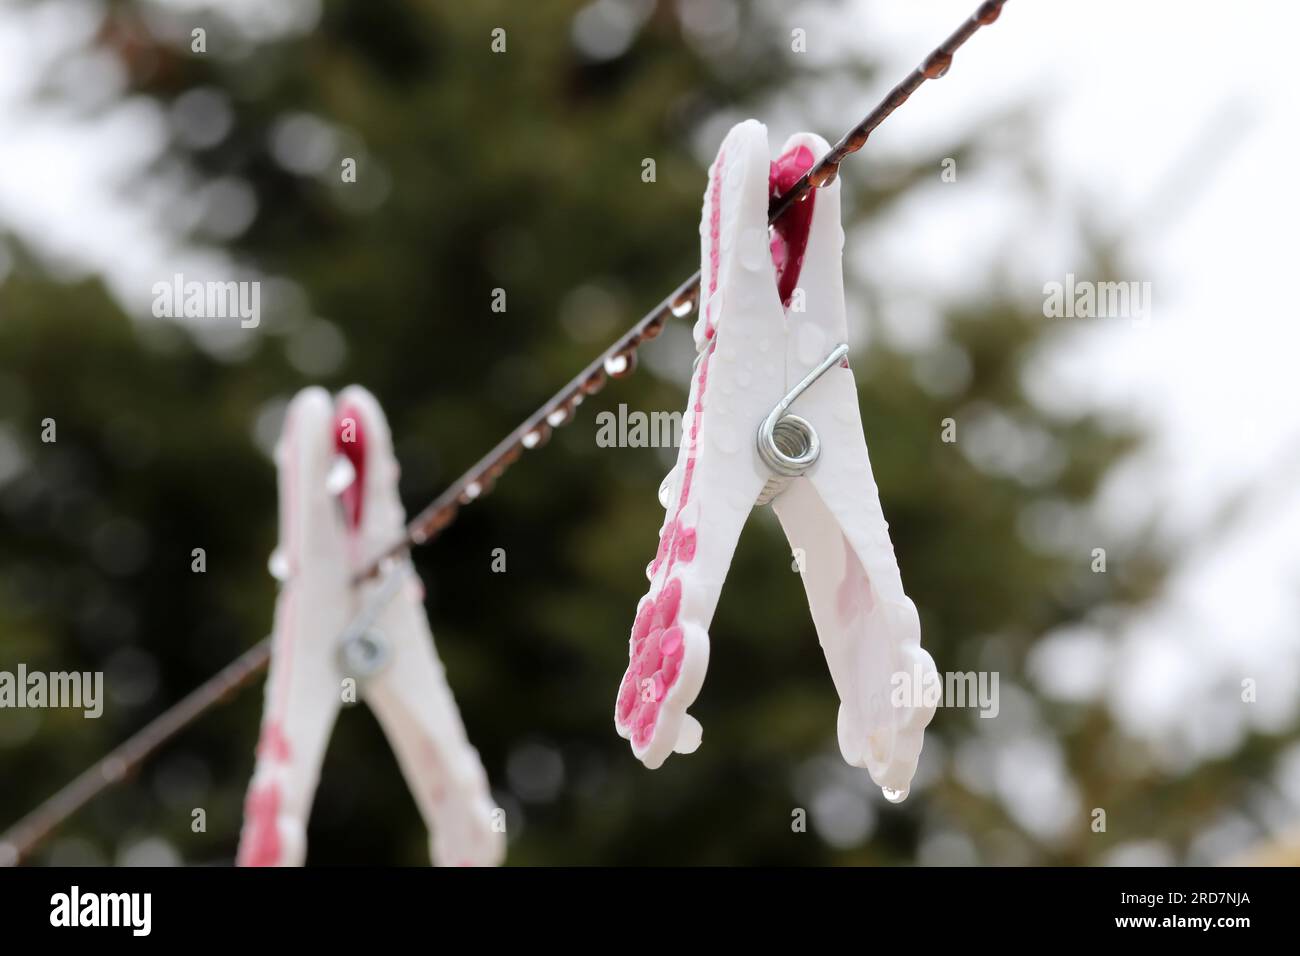 rain-soaked clothespin on a clothesline Stock Photo